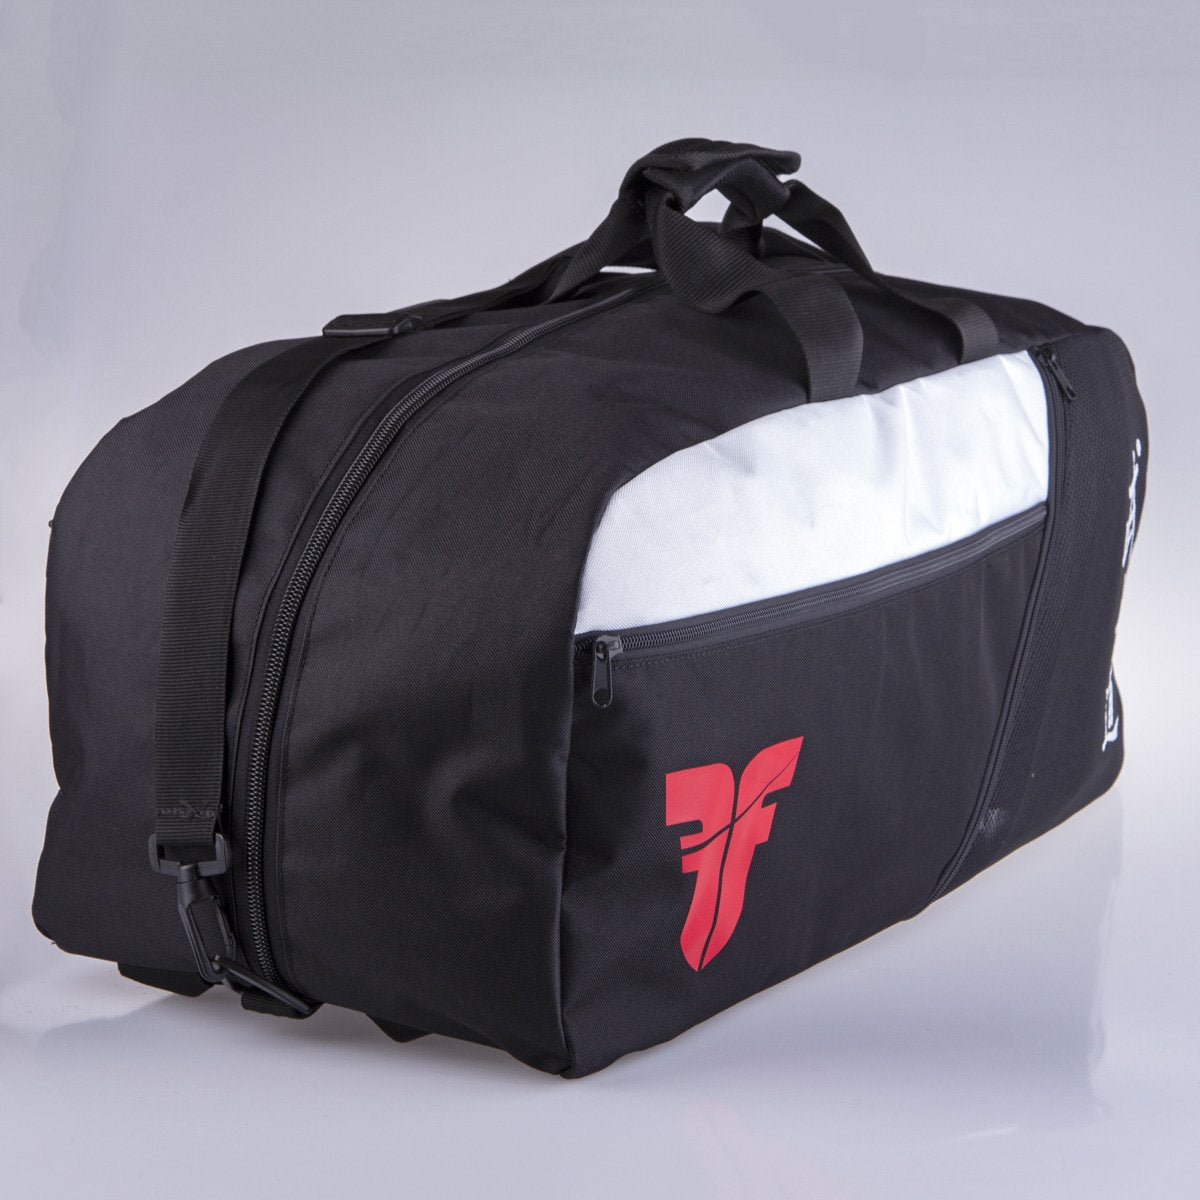 Sports Bag FIGHTER calligraphy - black